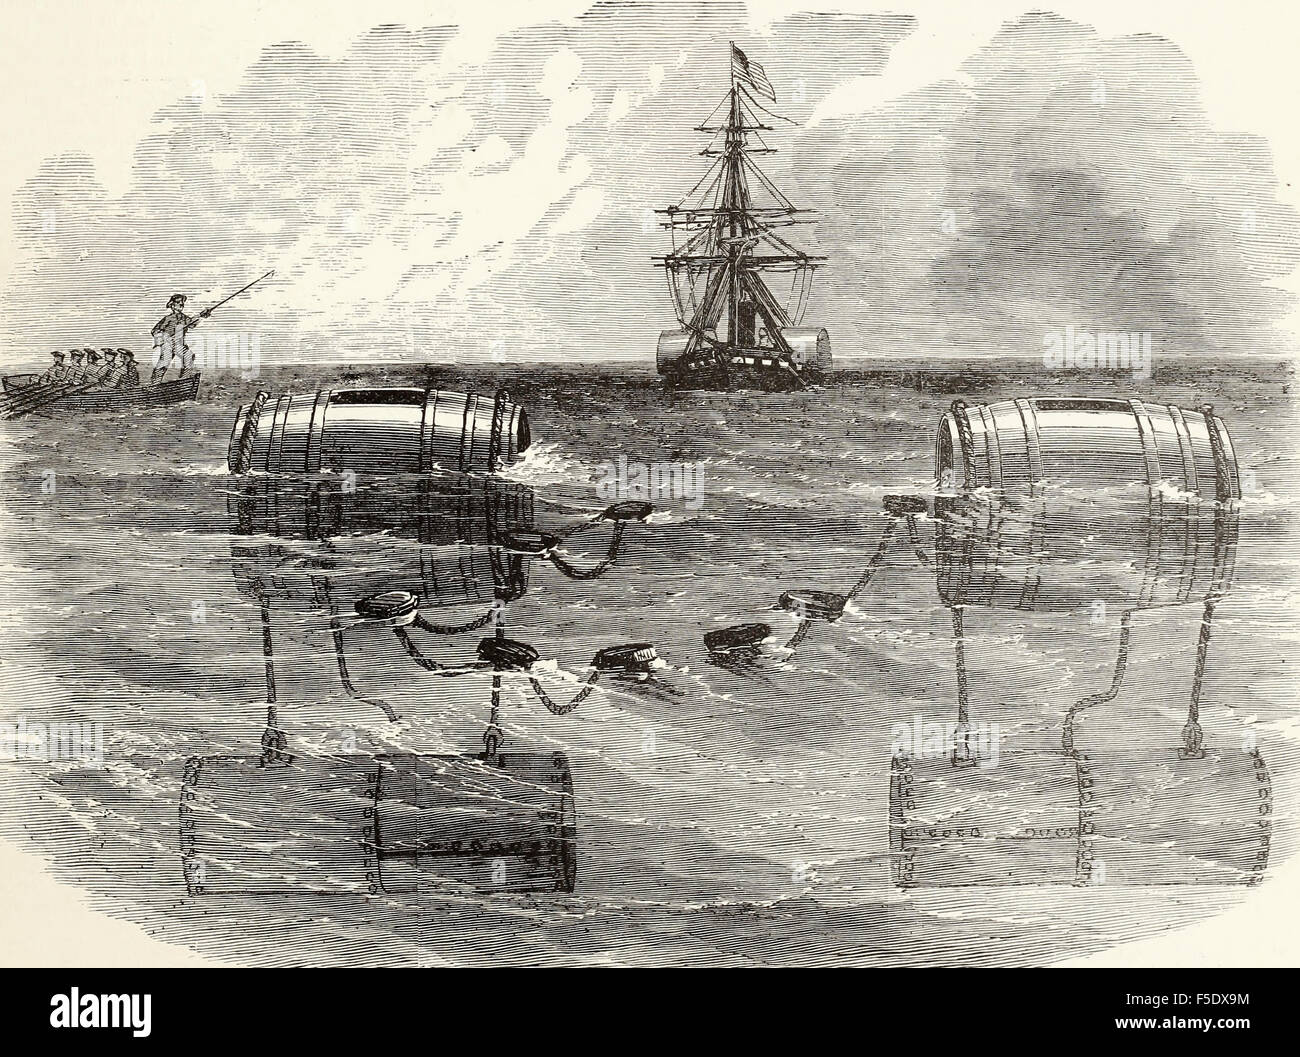 Infernal machine designed by the Confederates to destroy the Federal Flotilla in the Potomac discovered by Captain Budd on the steamer Resolute - USA Civil War Stock Photo